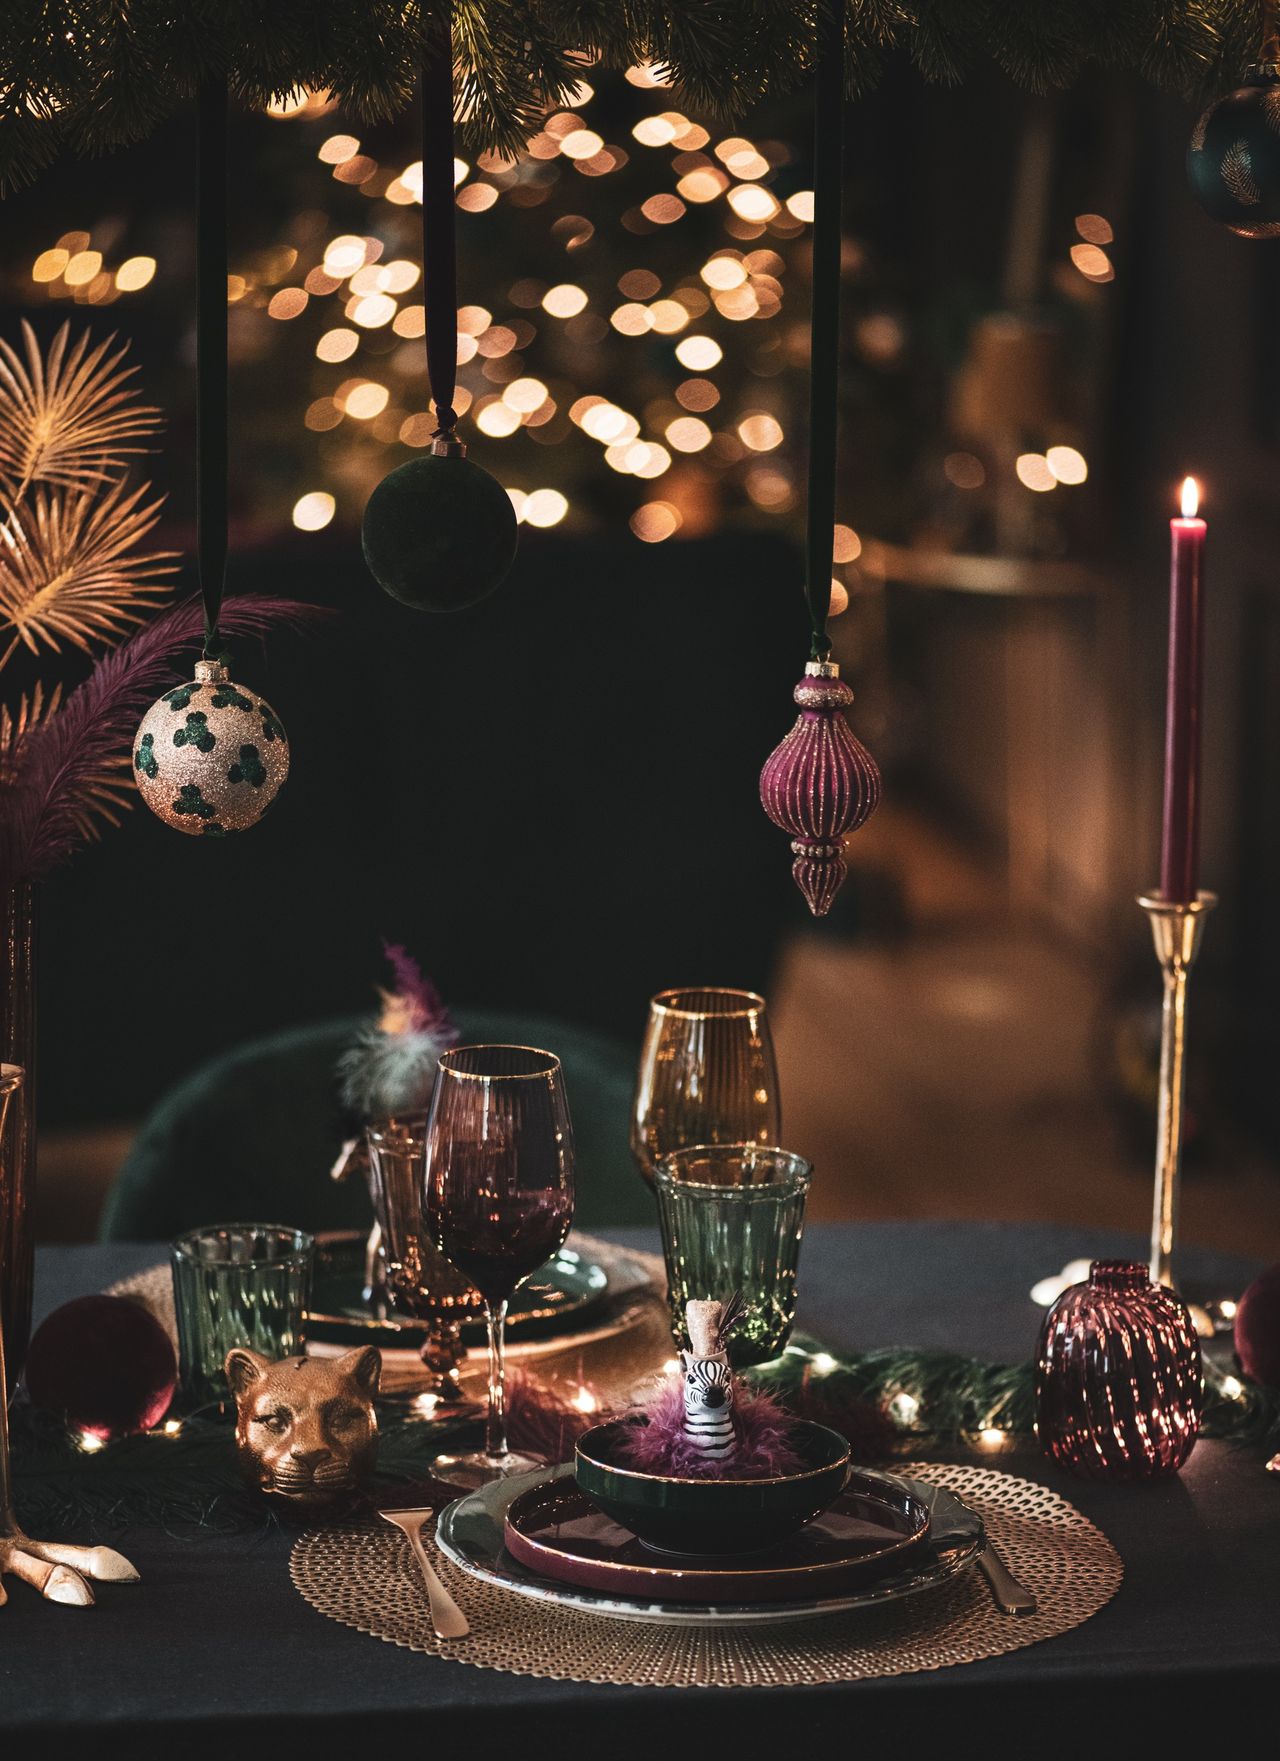 New Year's Eve decorating ideas to ring in 2022 in style | Livingetc